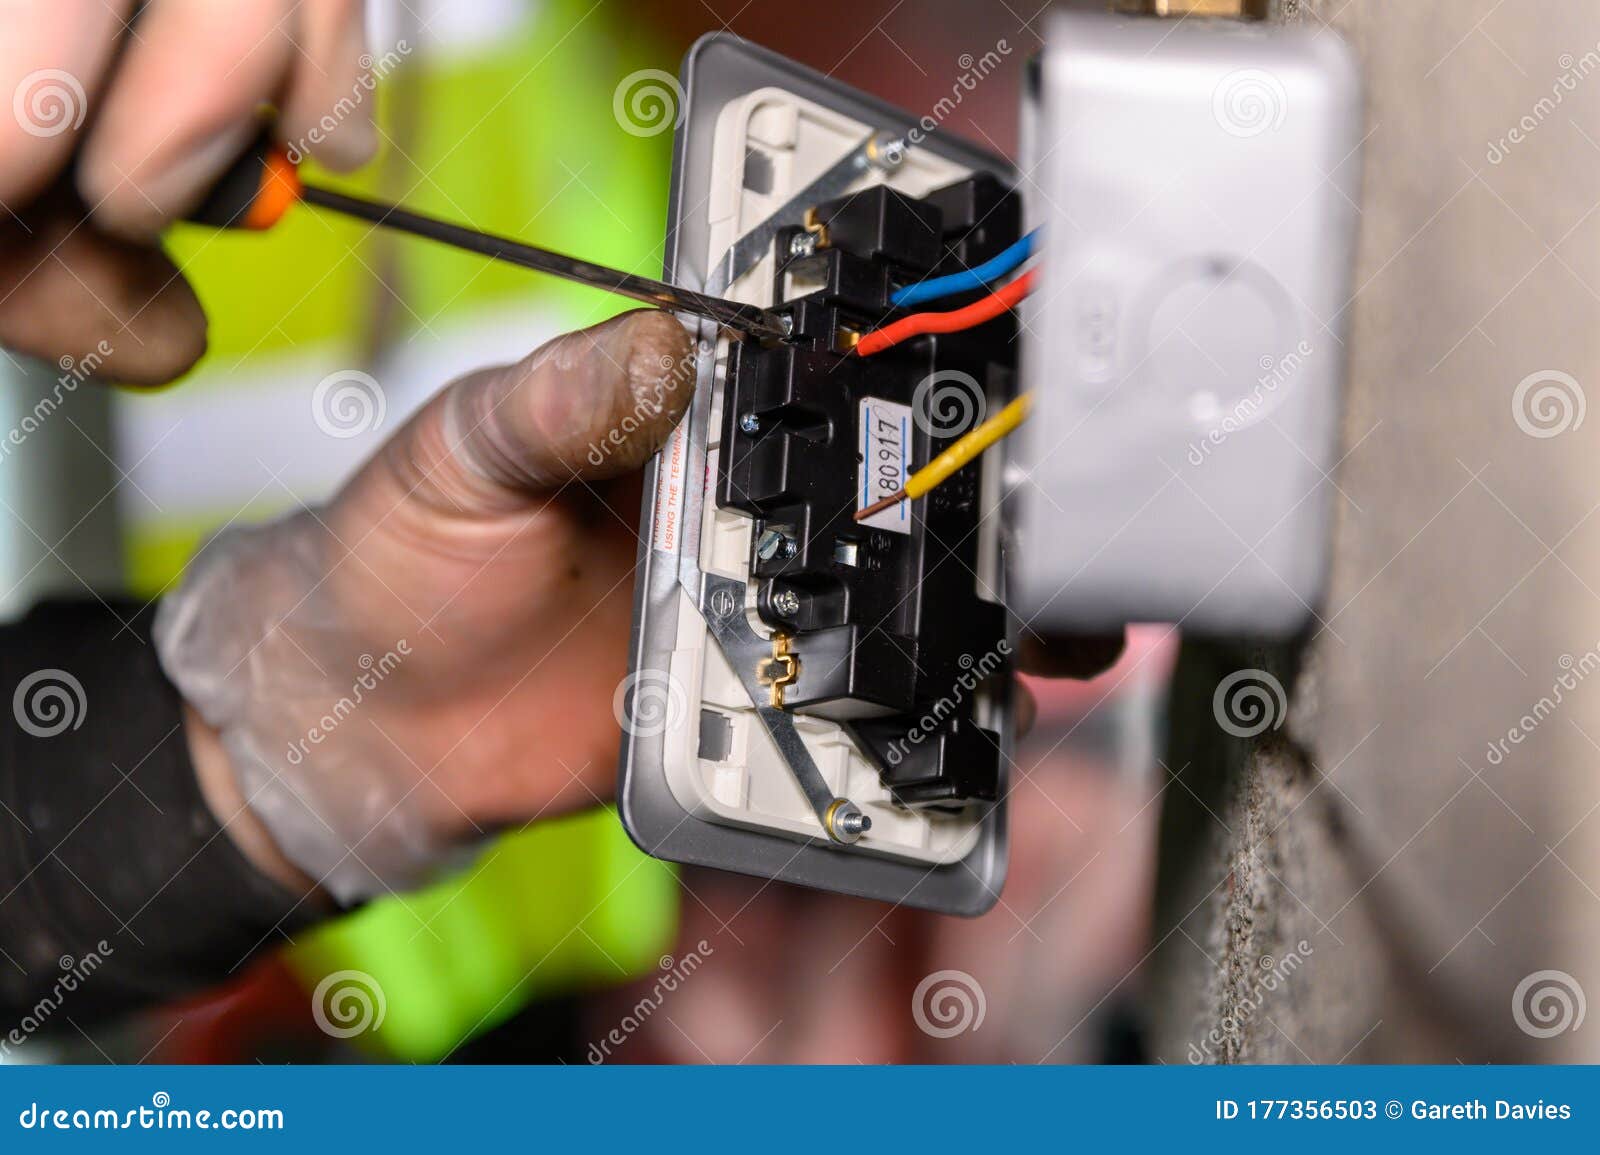 male hands wiring a uk socket plug on garage wall with screw driver